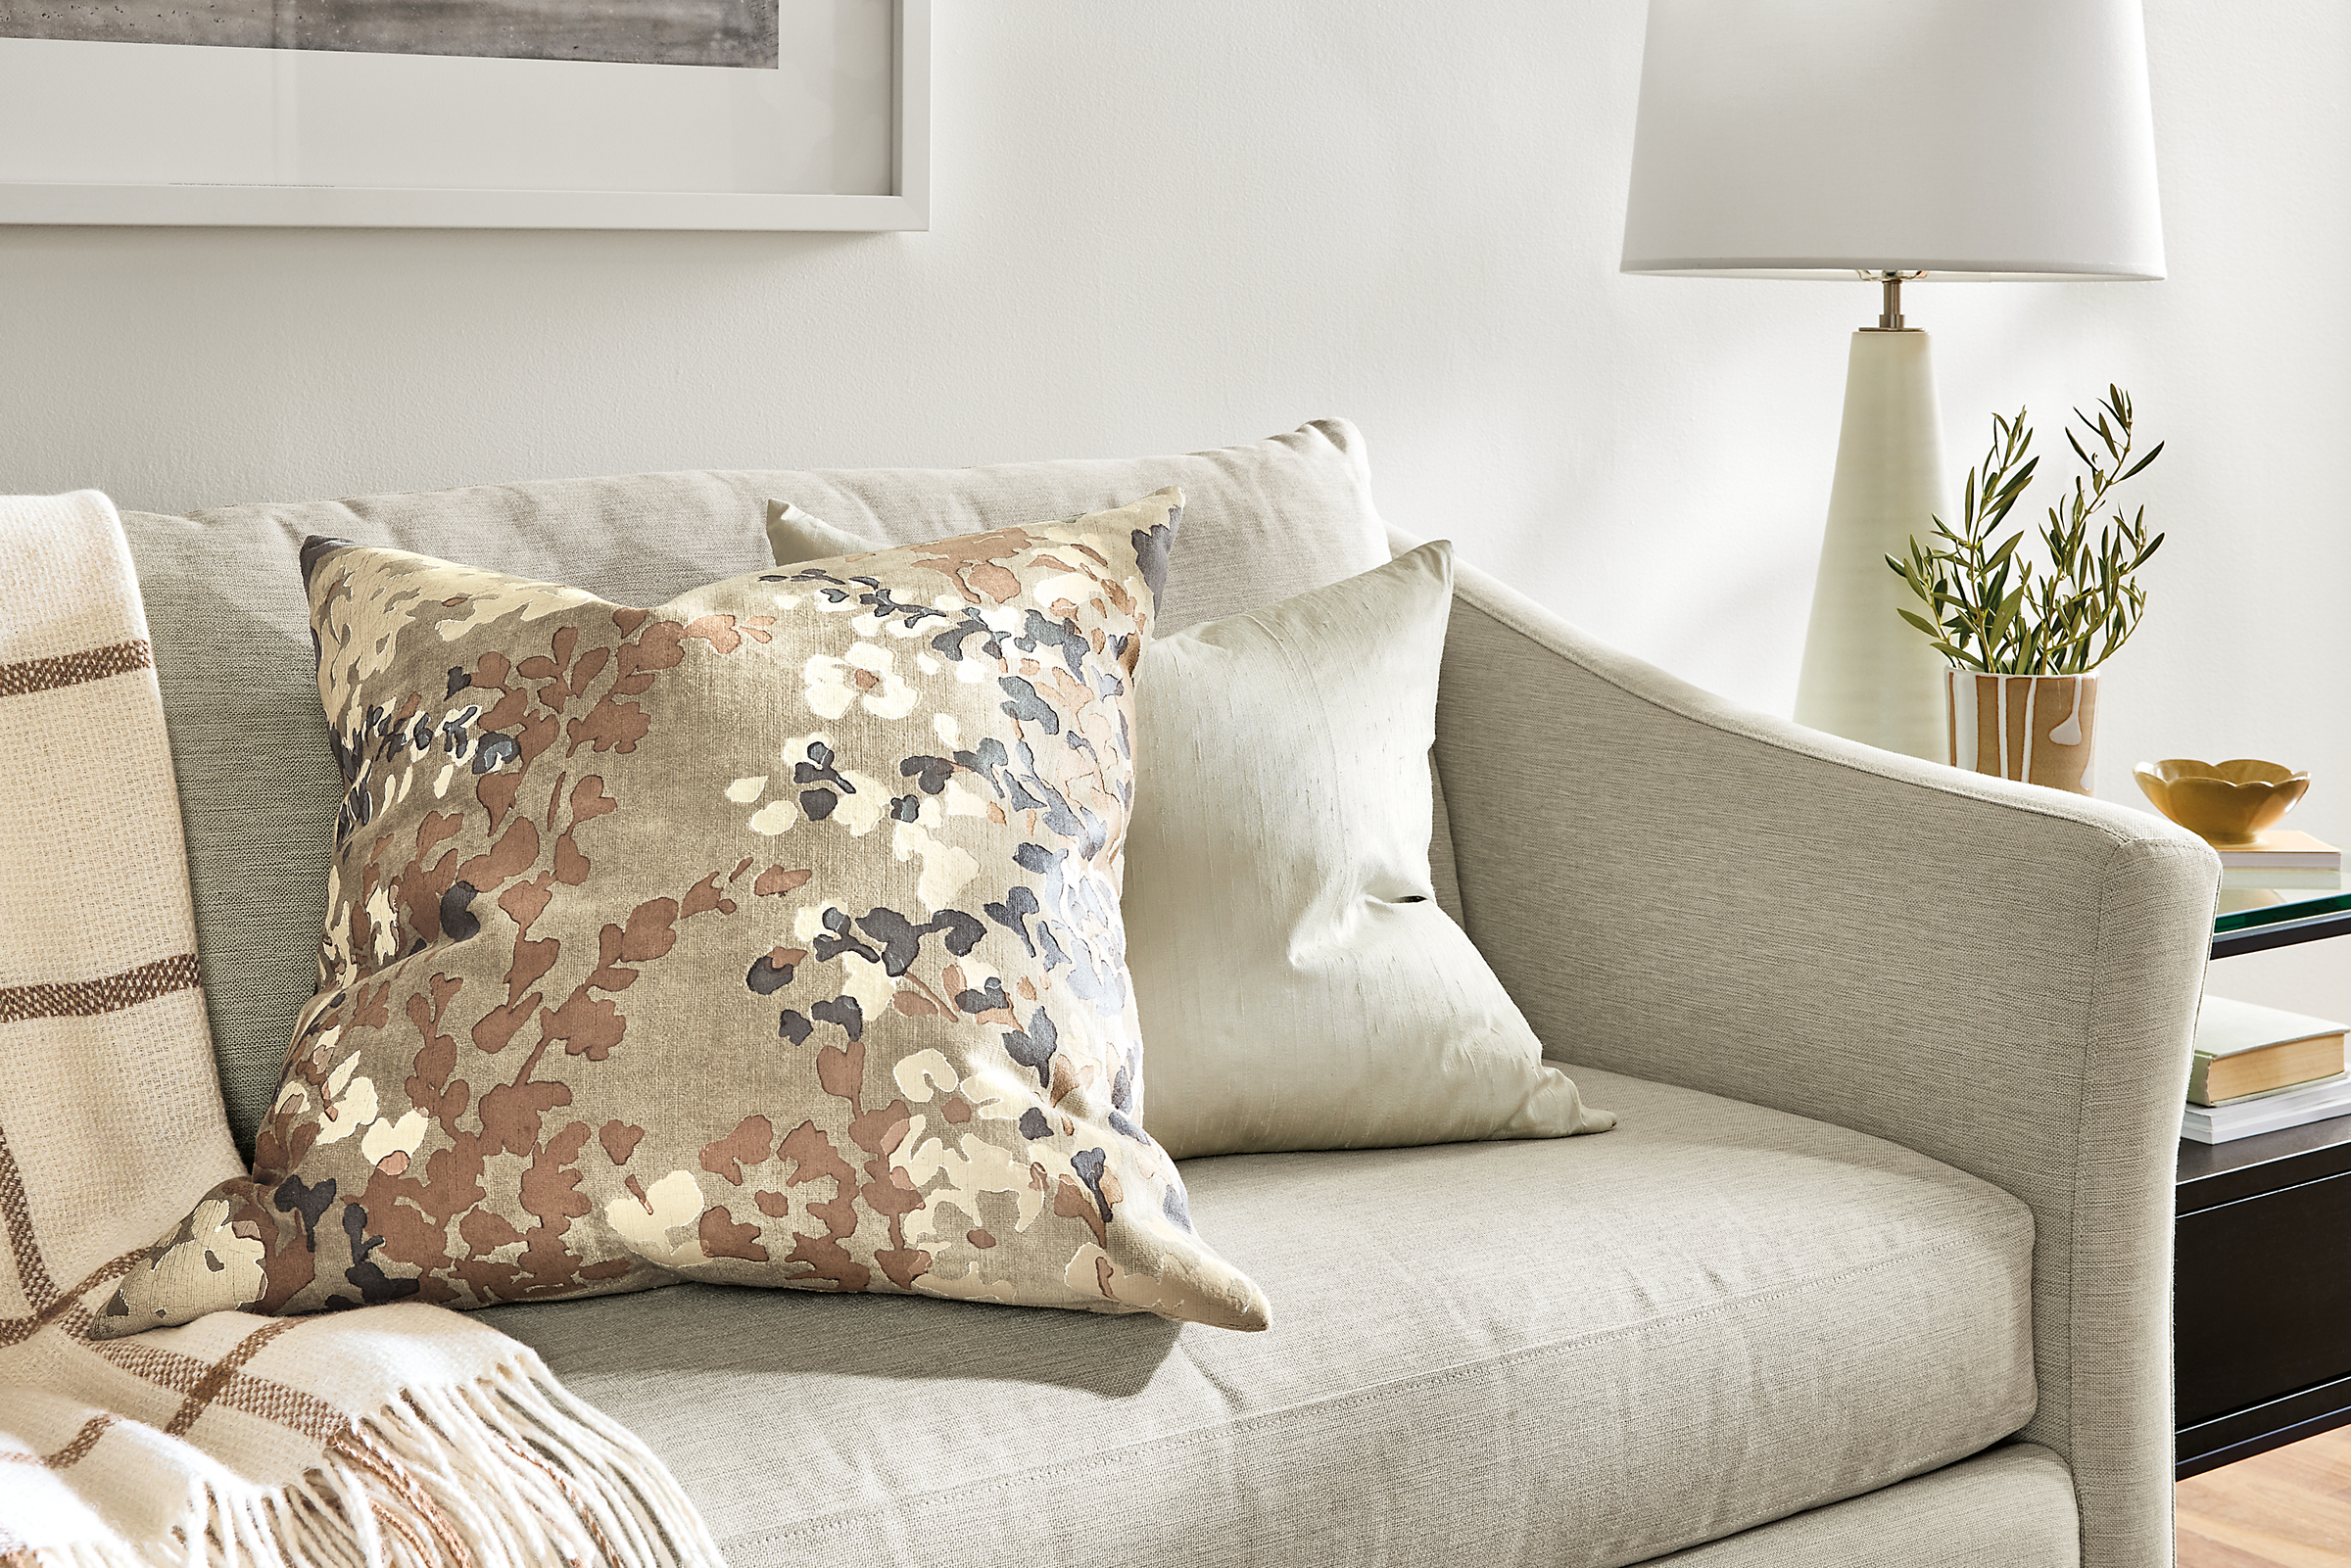 fleur pillow and silk pillow on top of maeve sofa.